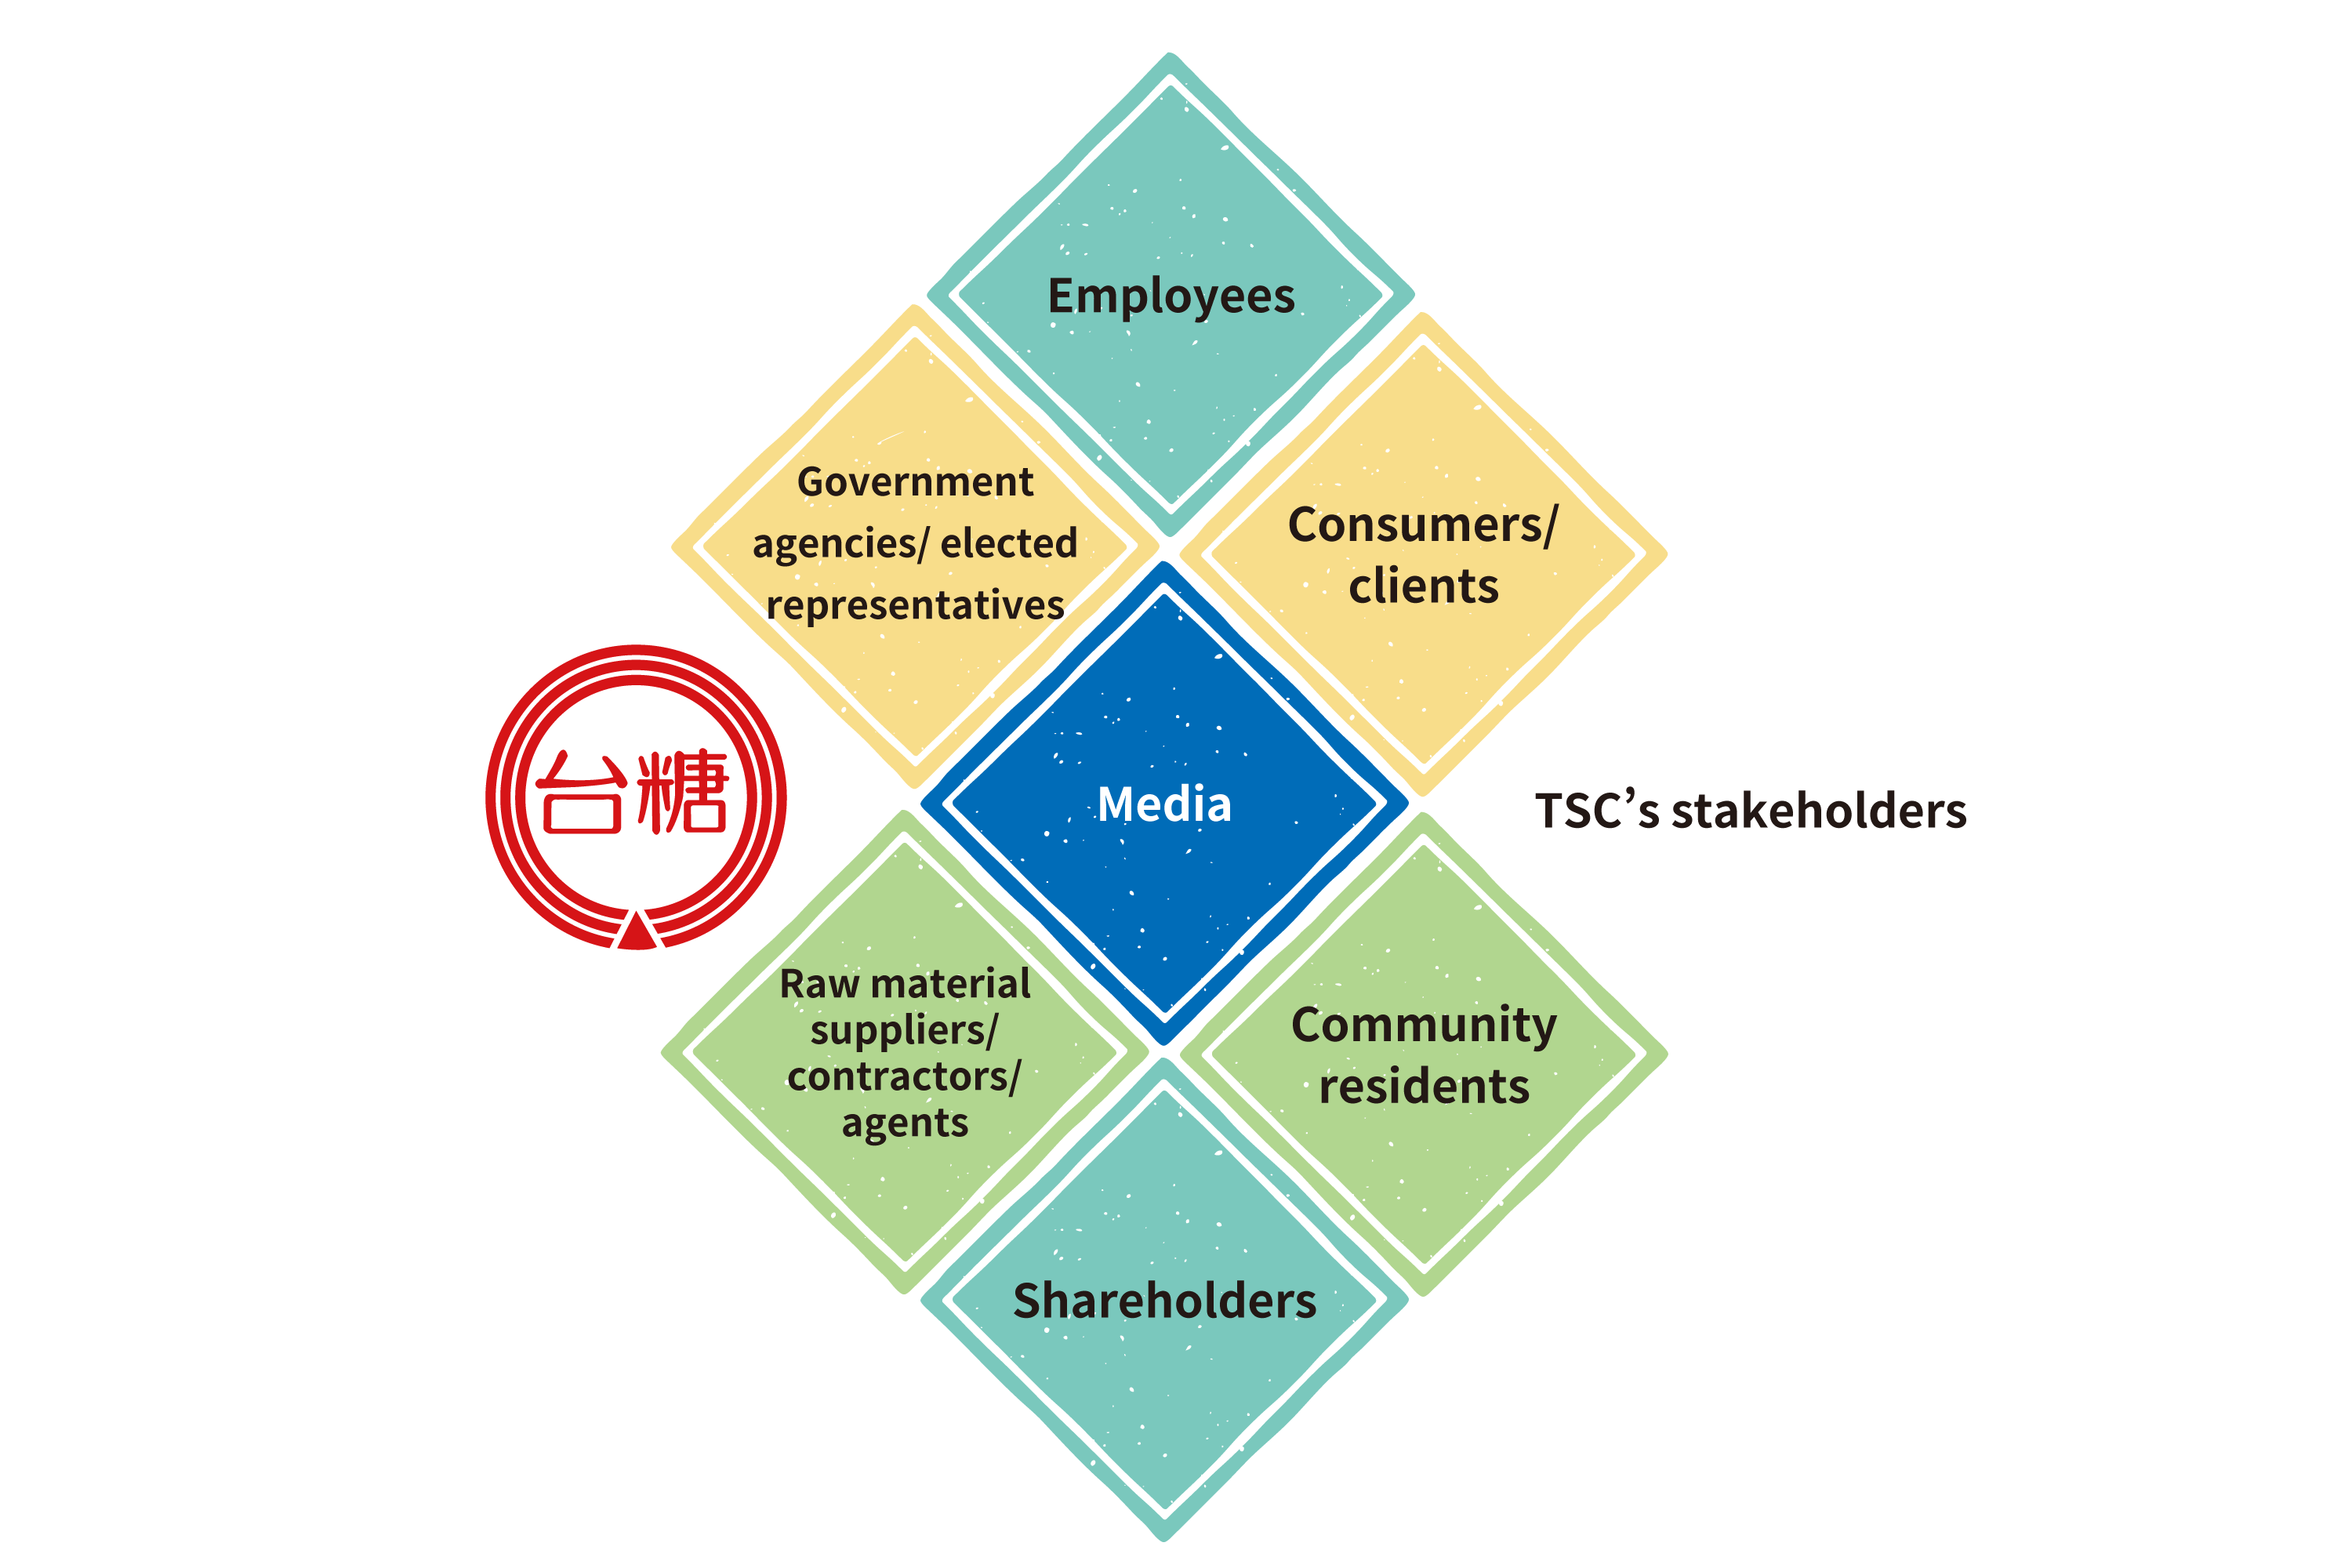 TSC’s 7 categories of stakeholders